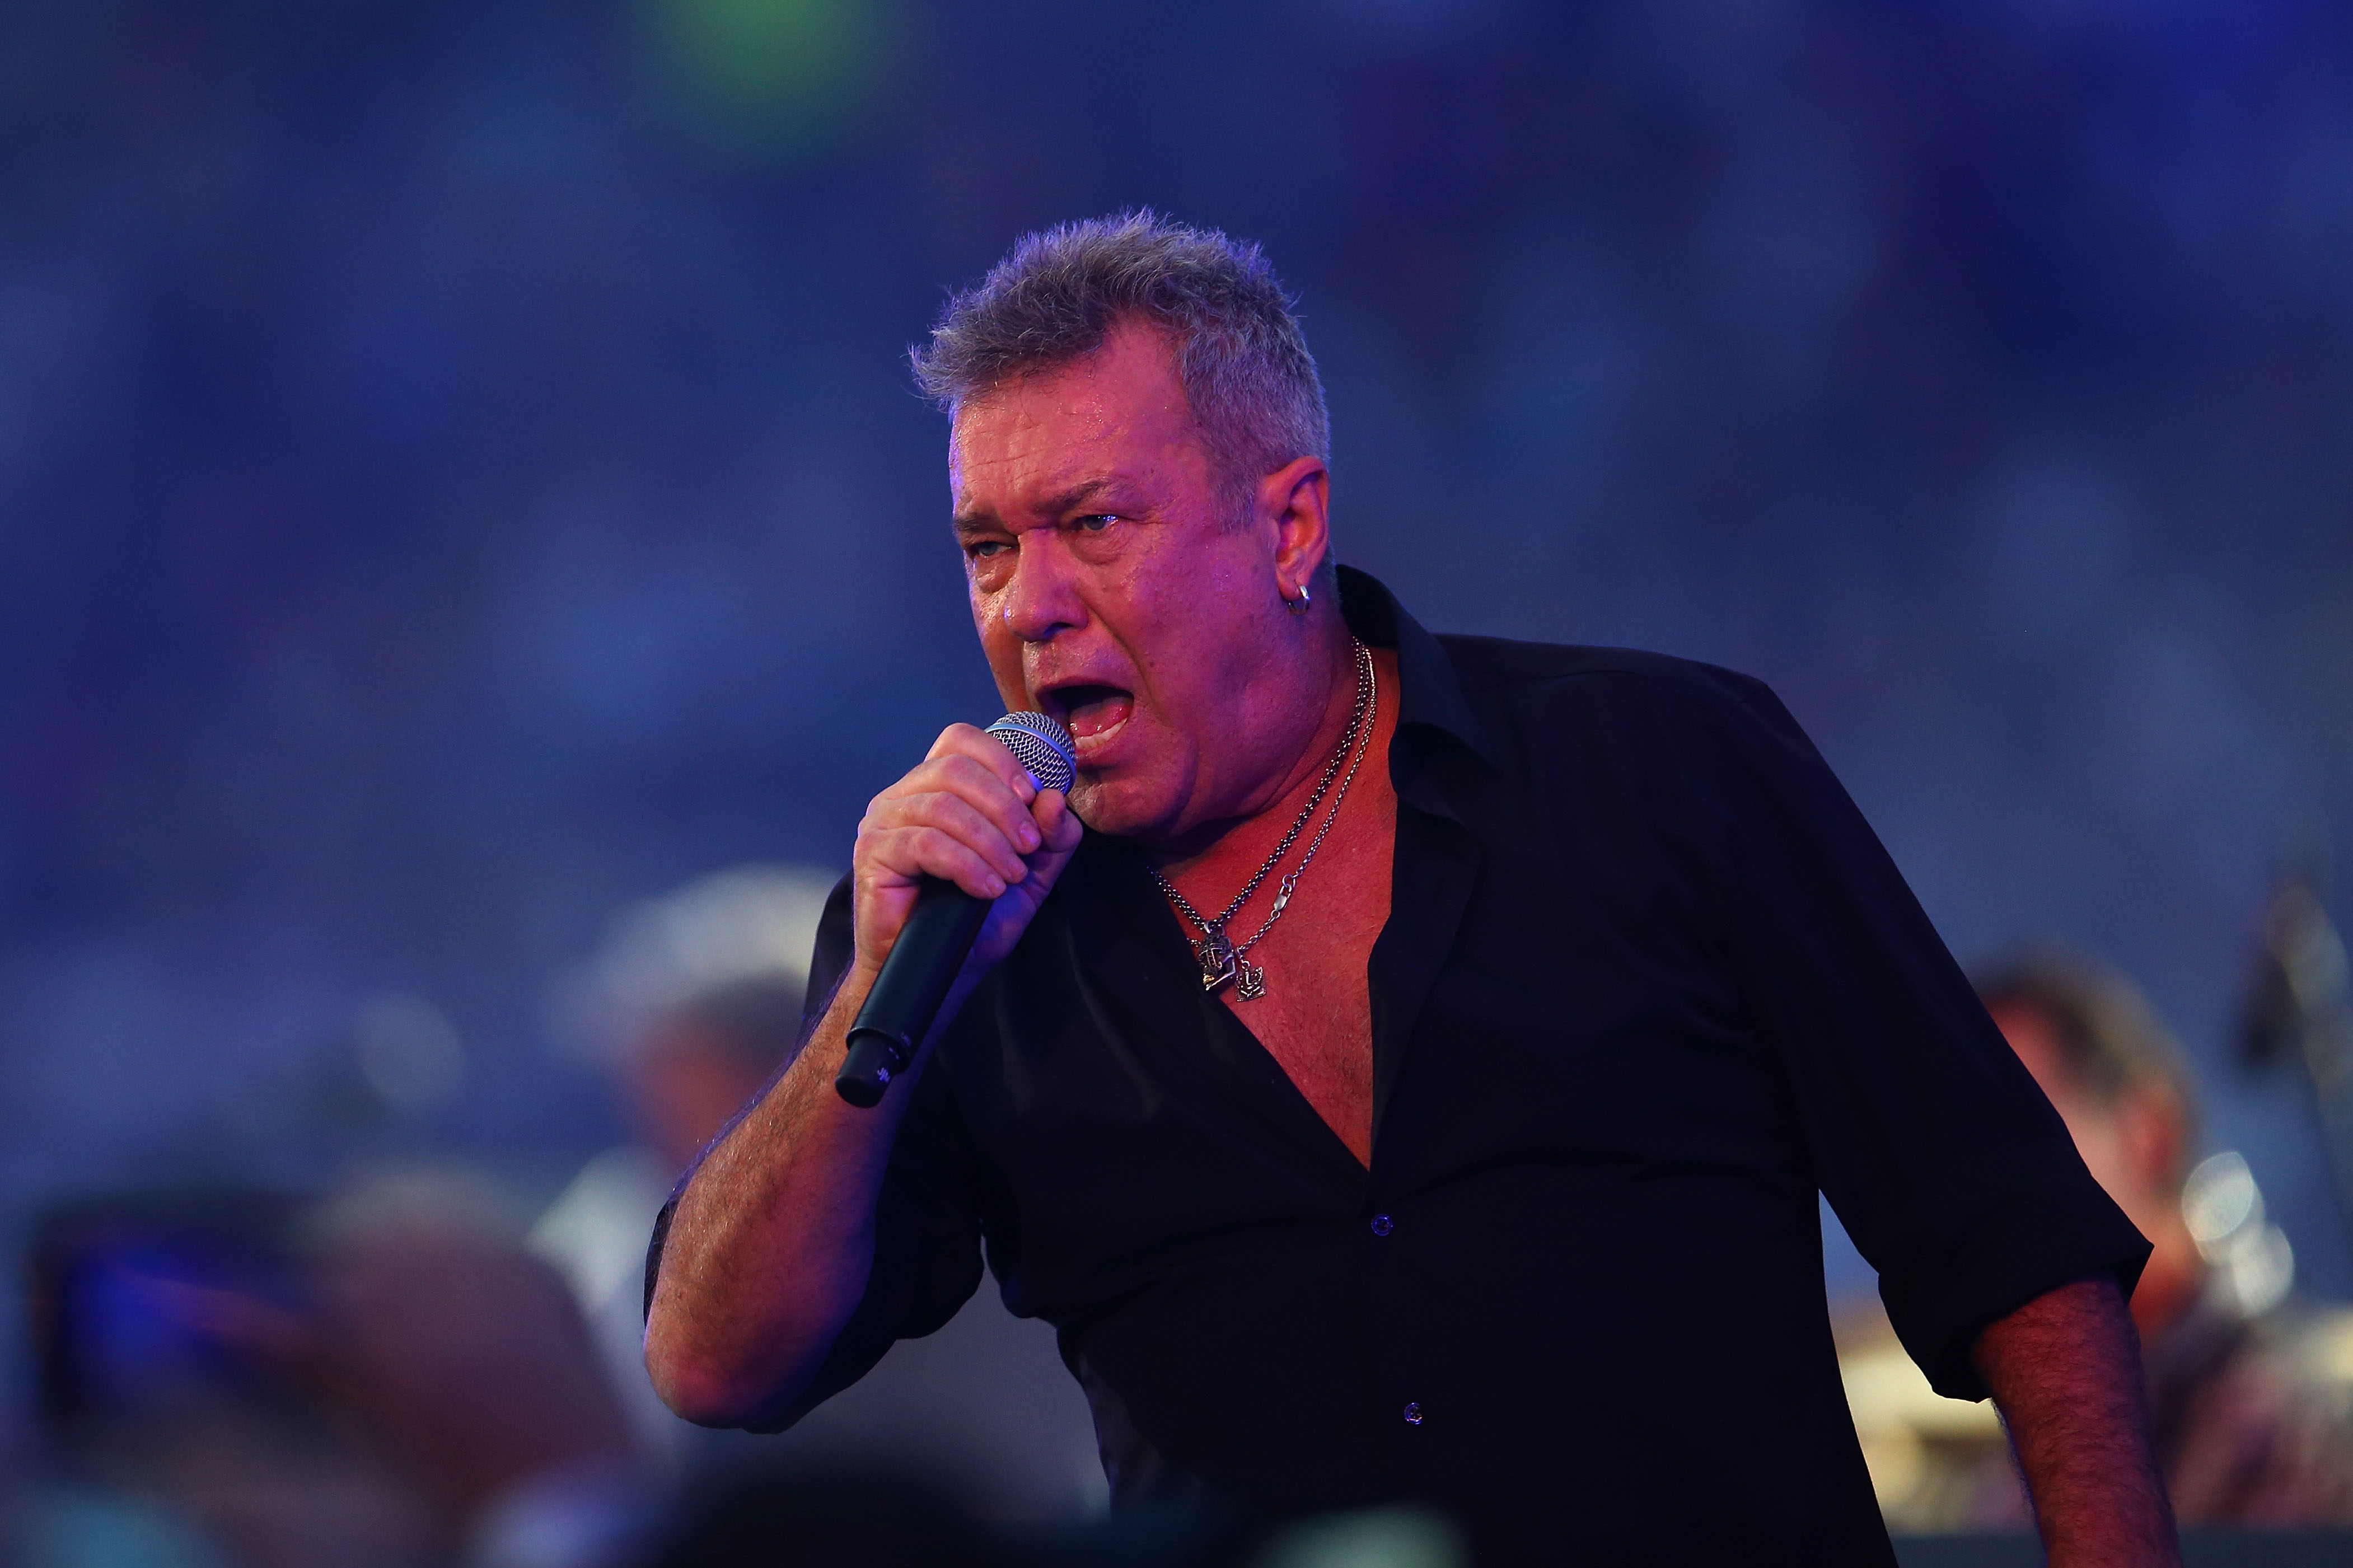 Jimmy Barnes perform ahead of the 2015 NRL Grand Final match between the Brisbane Broncos and the North Queensland.